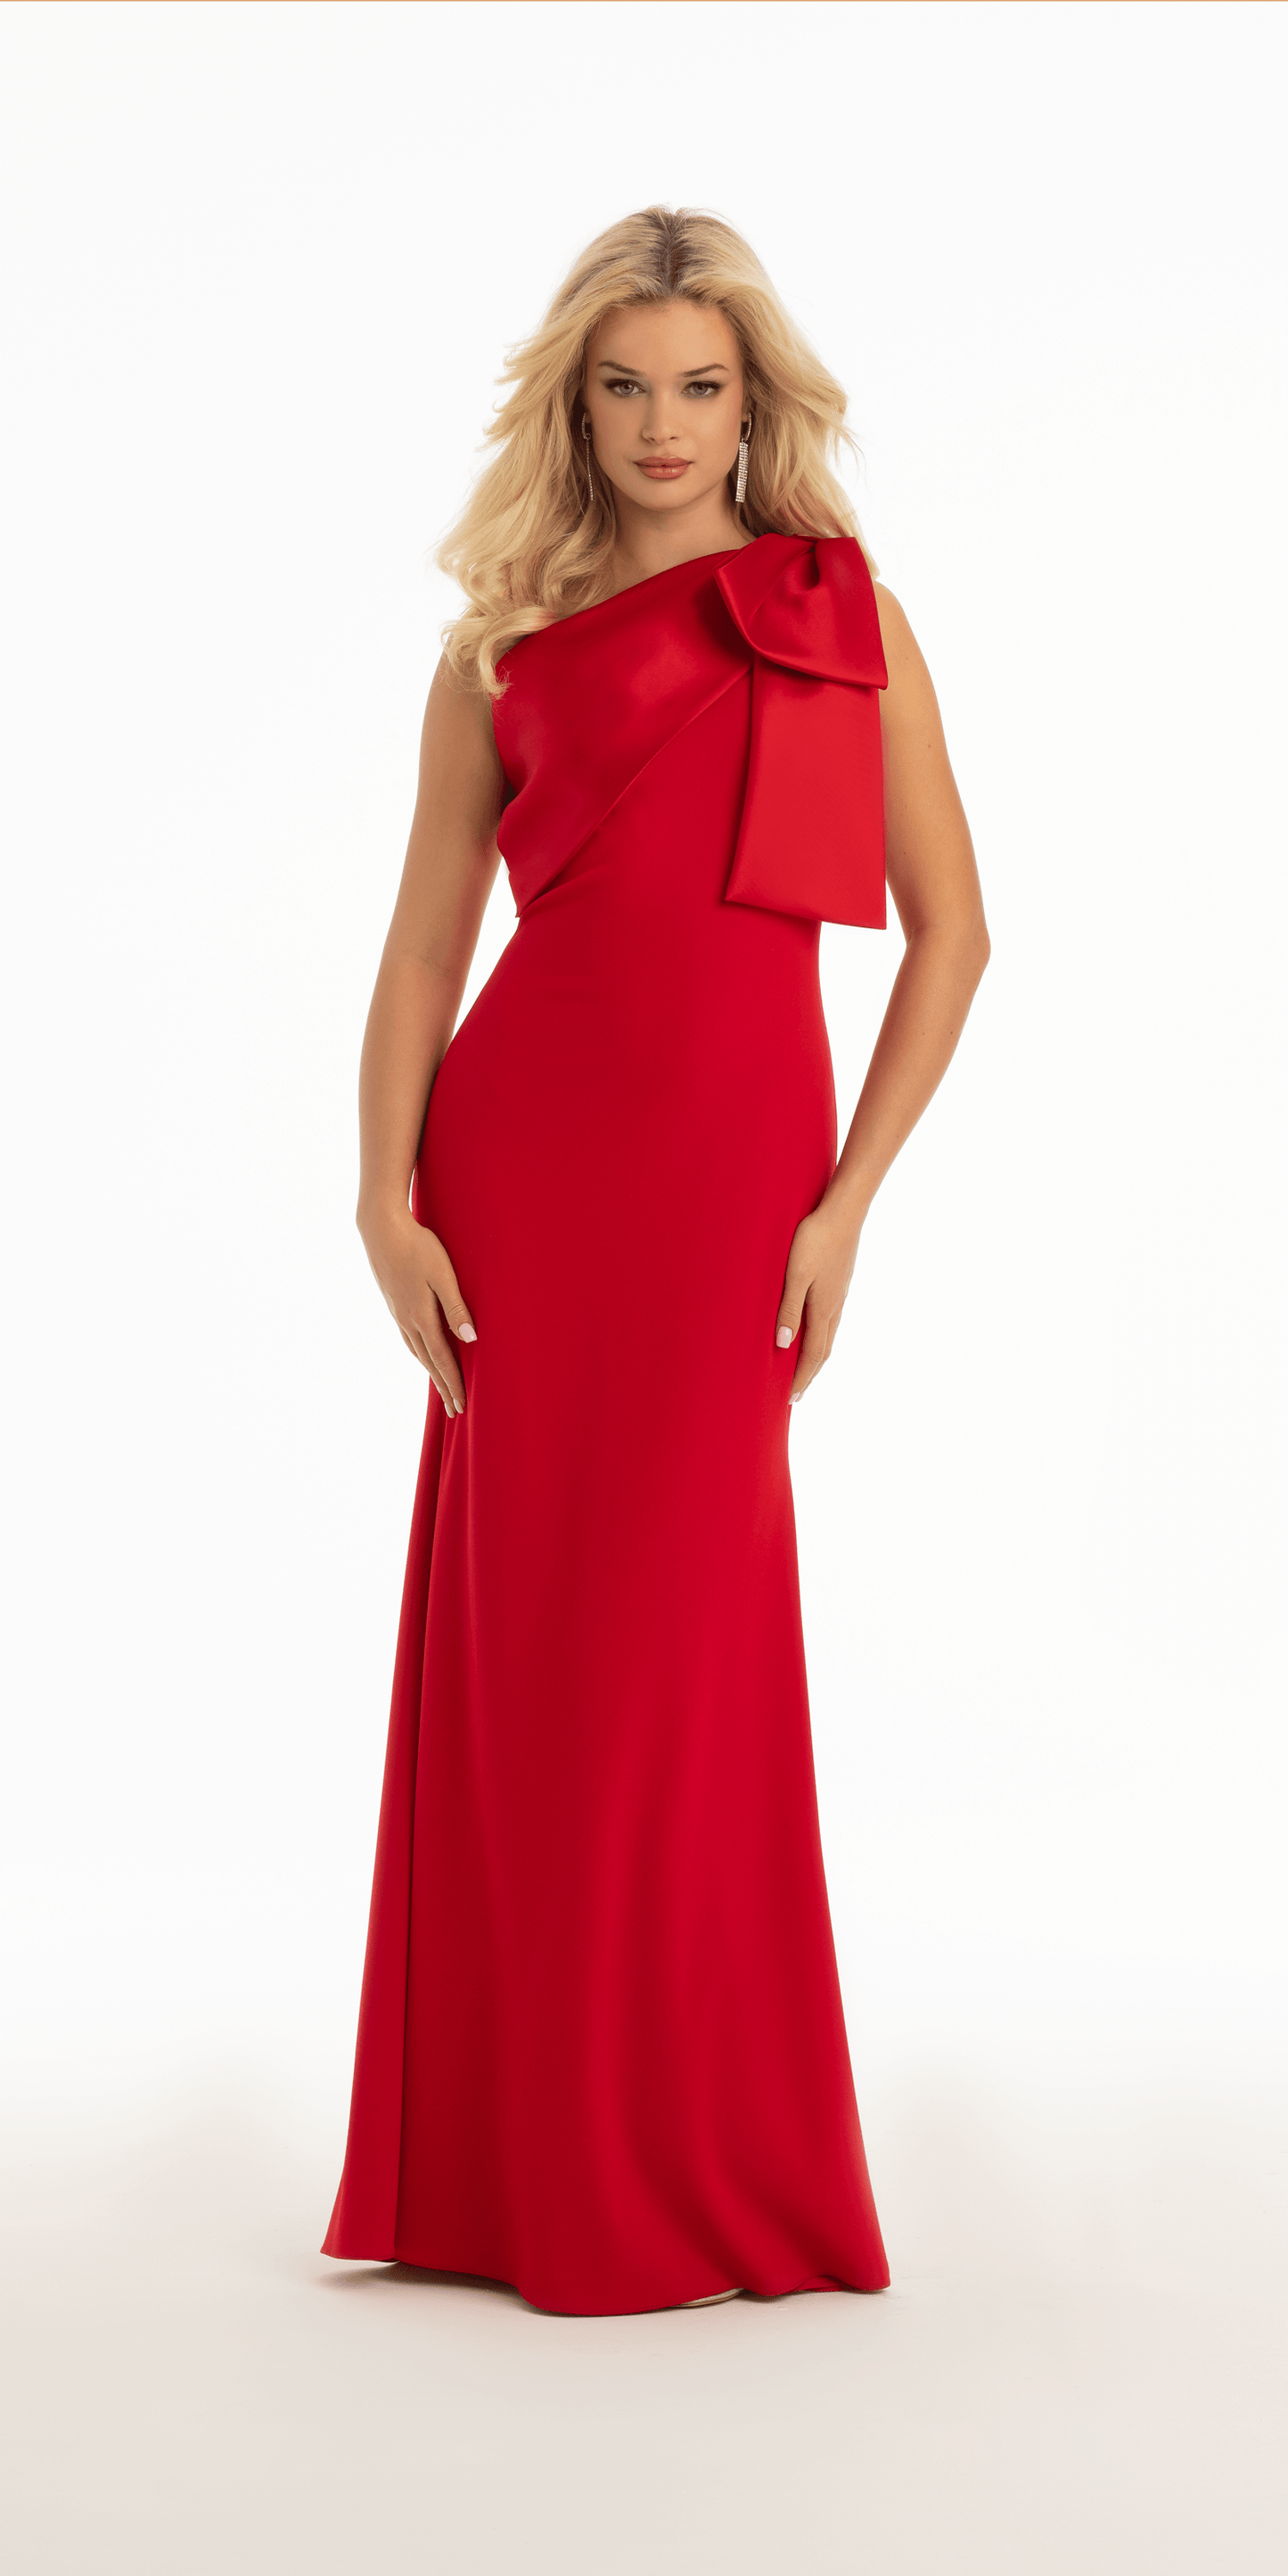 Camille La Vie Crepe One Shoulder Trumpet Dress with Bow Detail missy / 2 / red